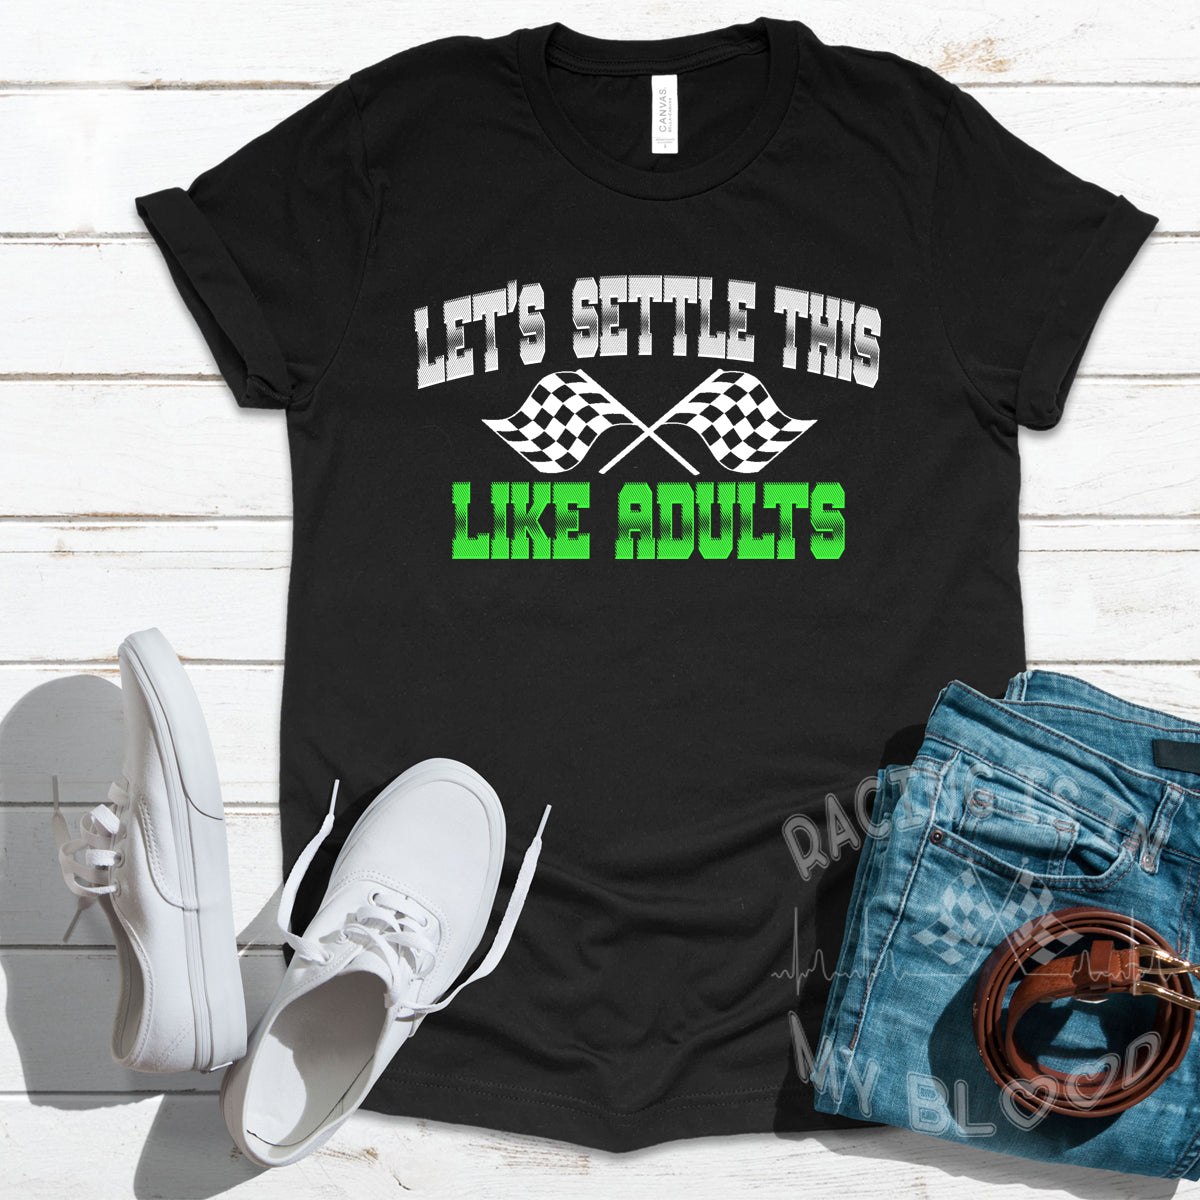 Let's Settle This Like Adults Racing T-Shirts!